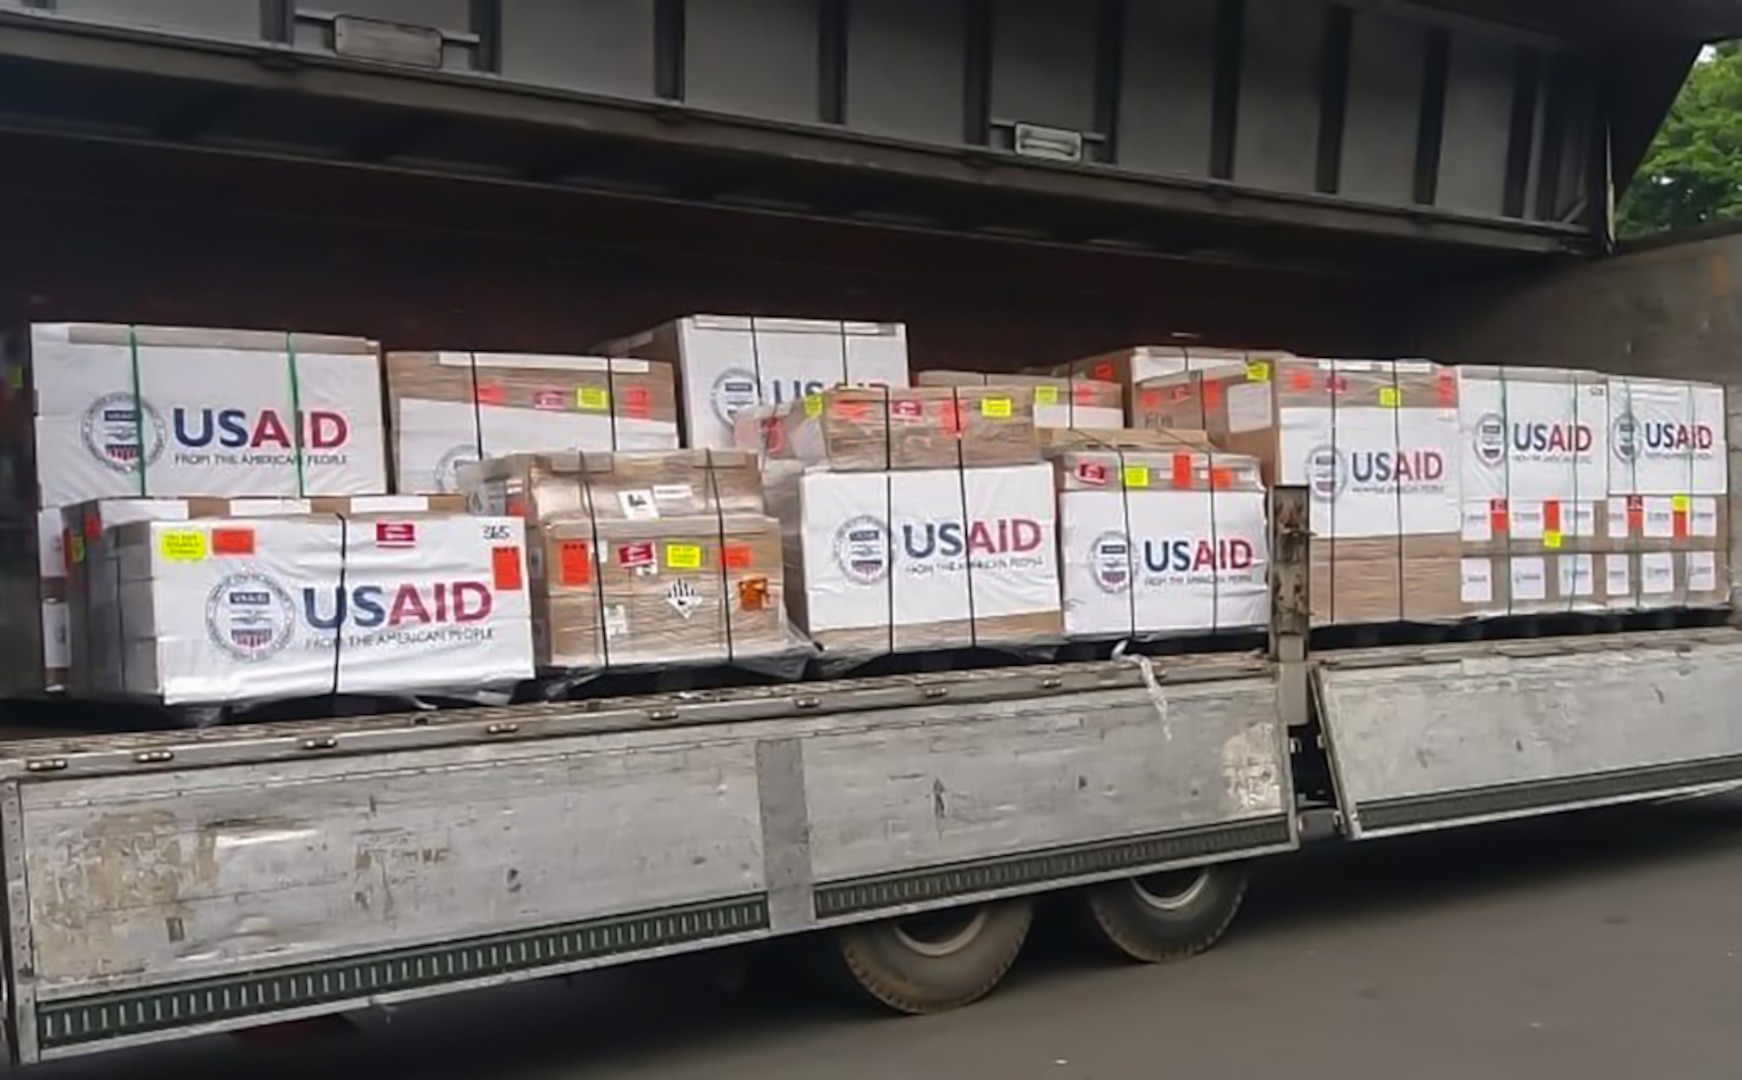 United States Donates an Additional 400 Ventilators to Support Indonesia in the Fight Against Covid-19